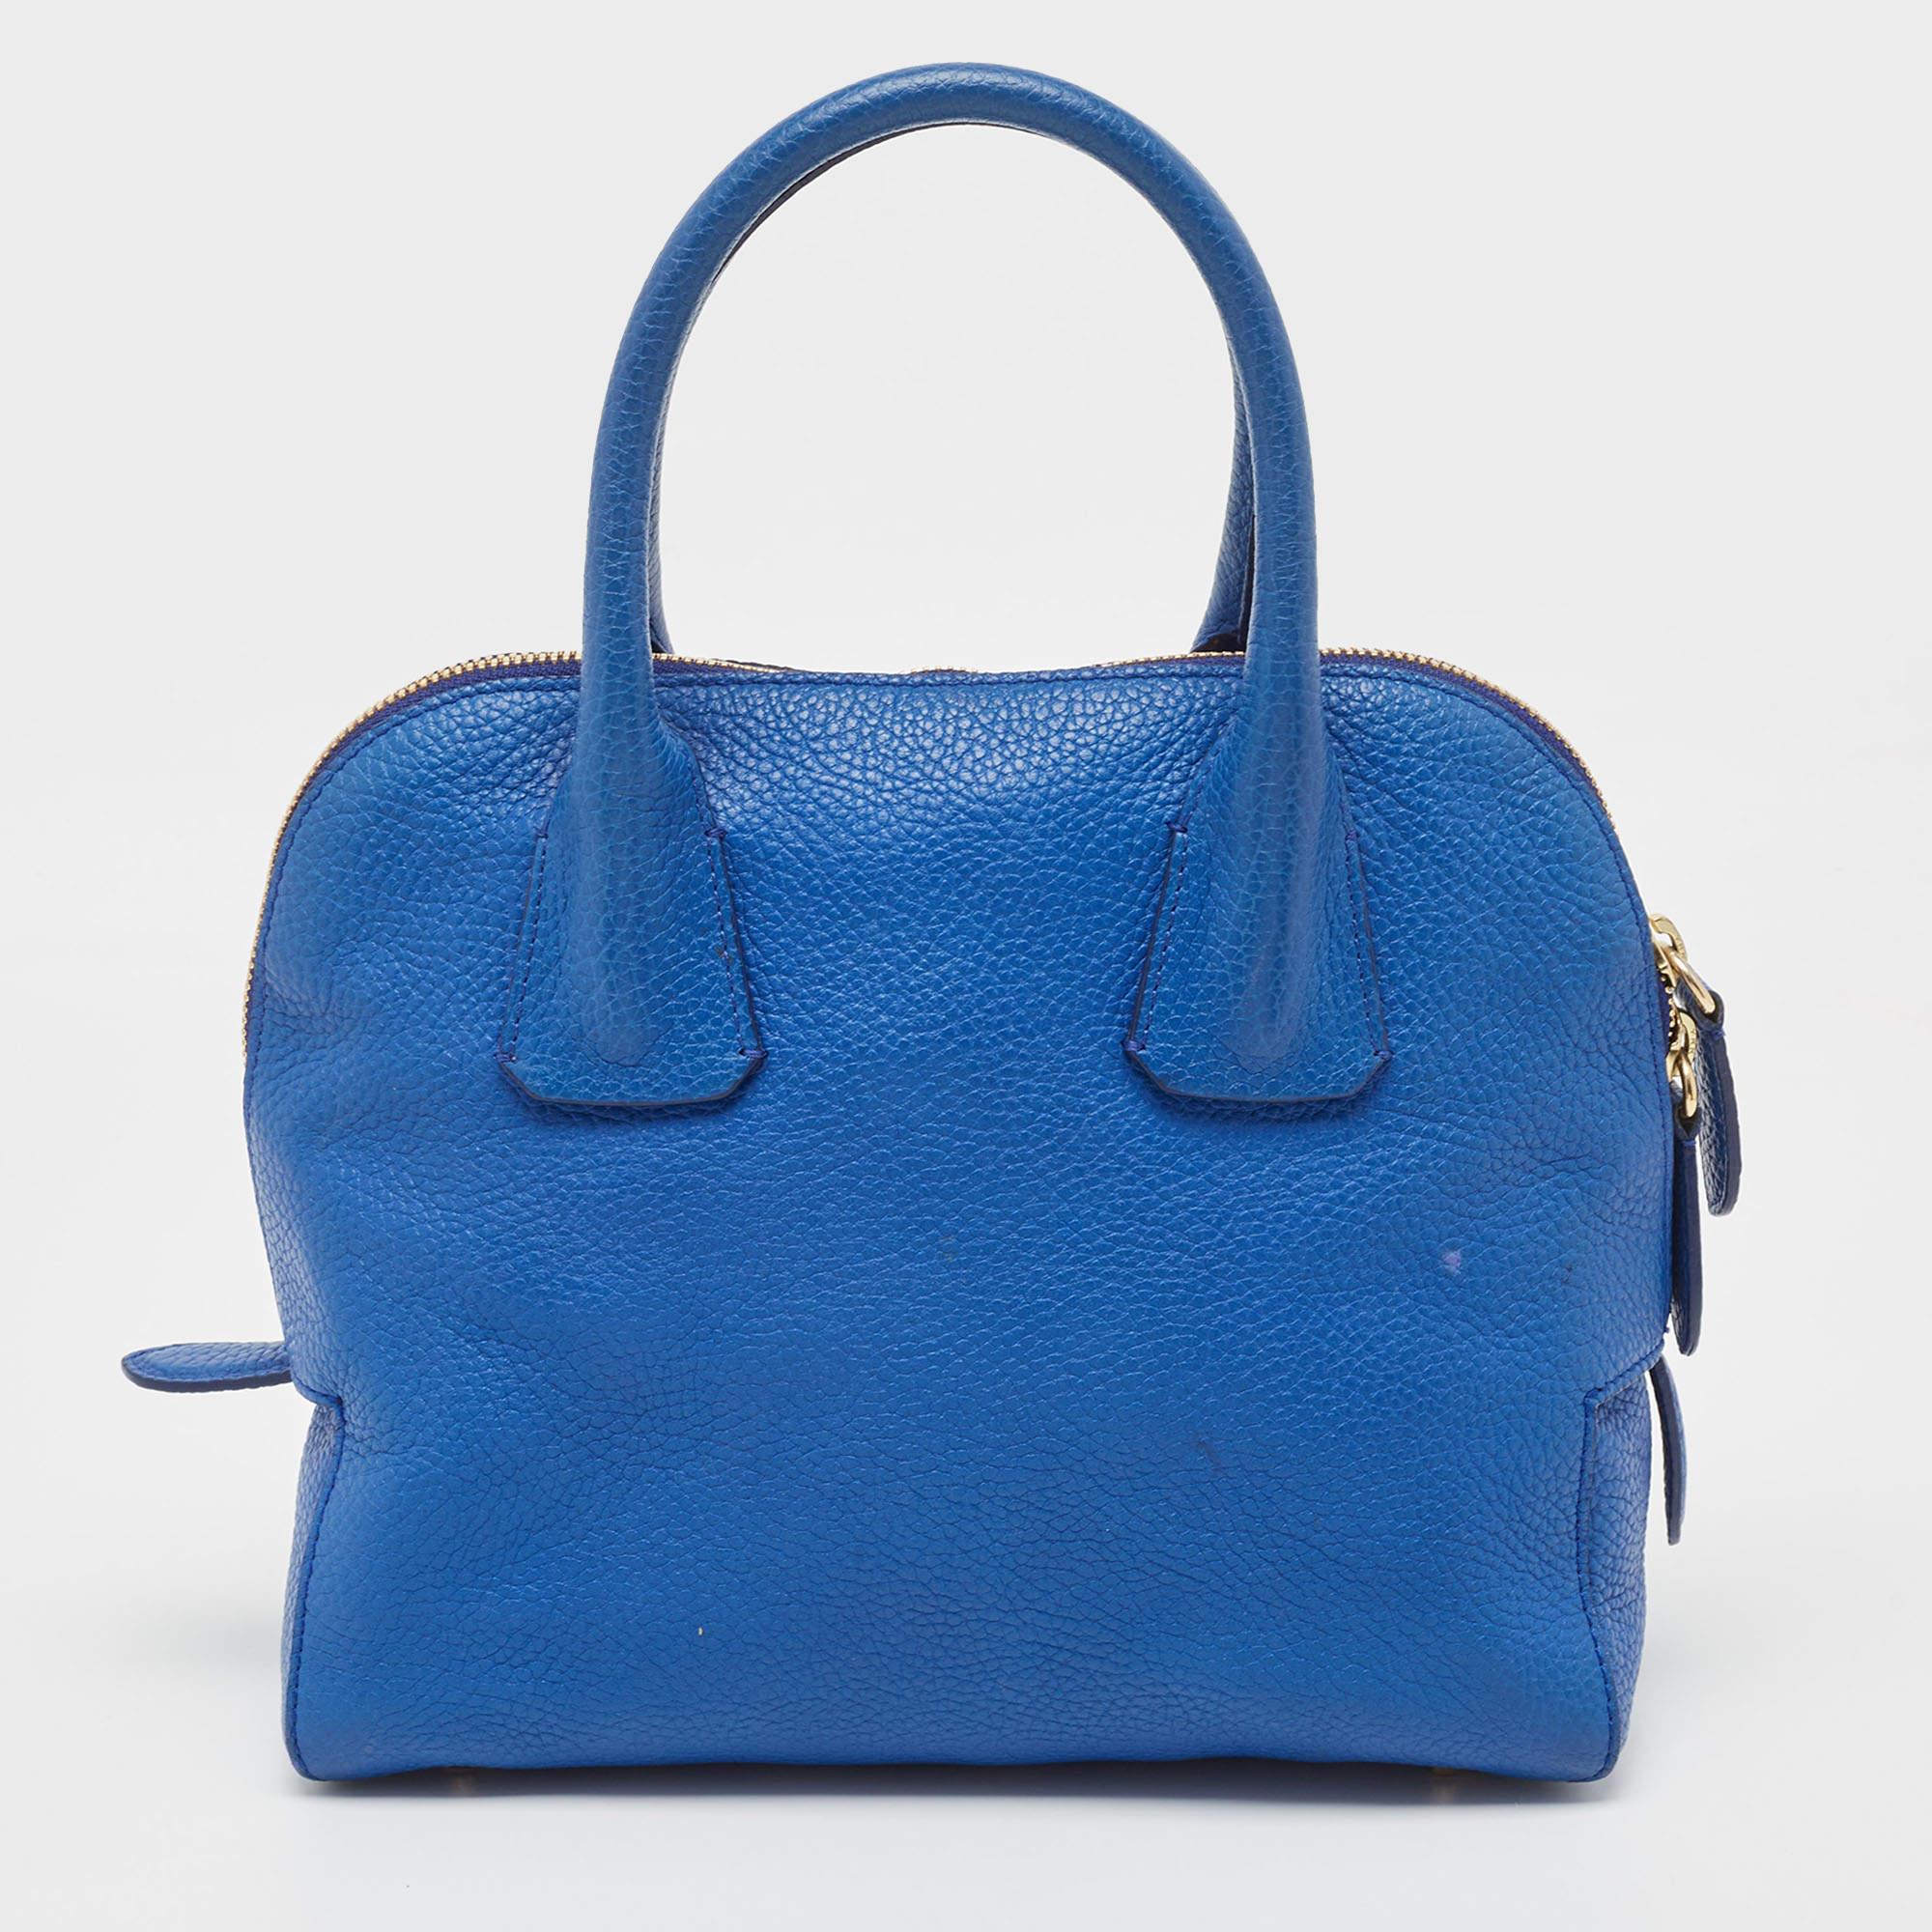 Burberry Blue Pebbled Leather Yorke Satchel For Sale 4